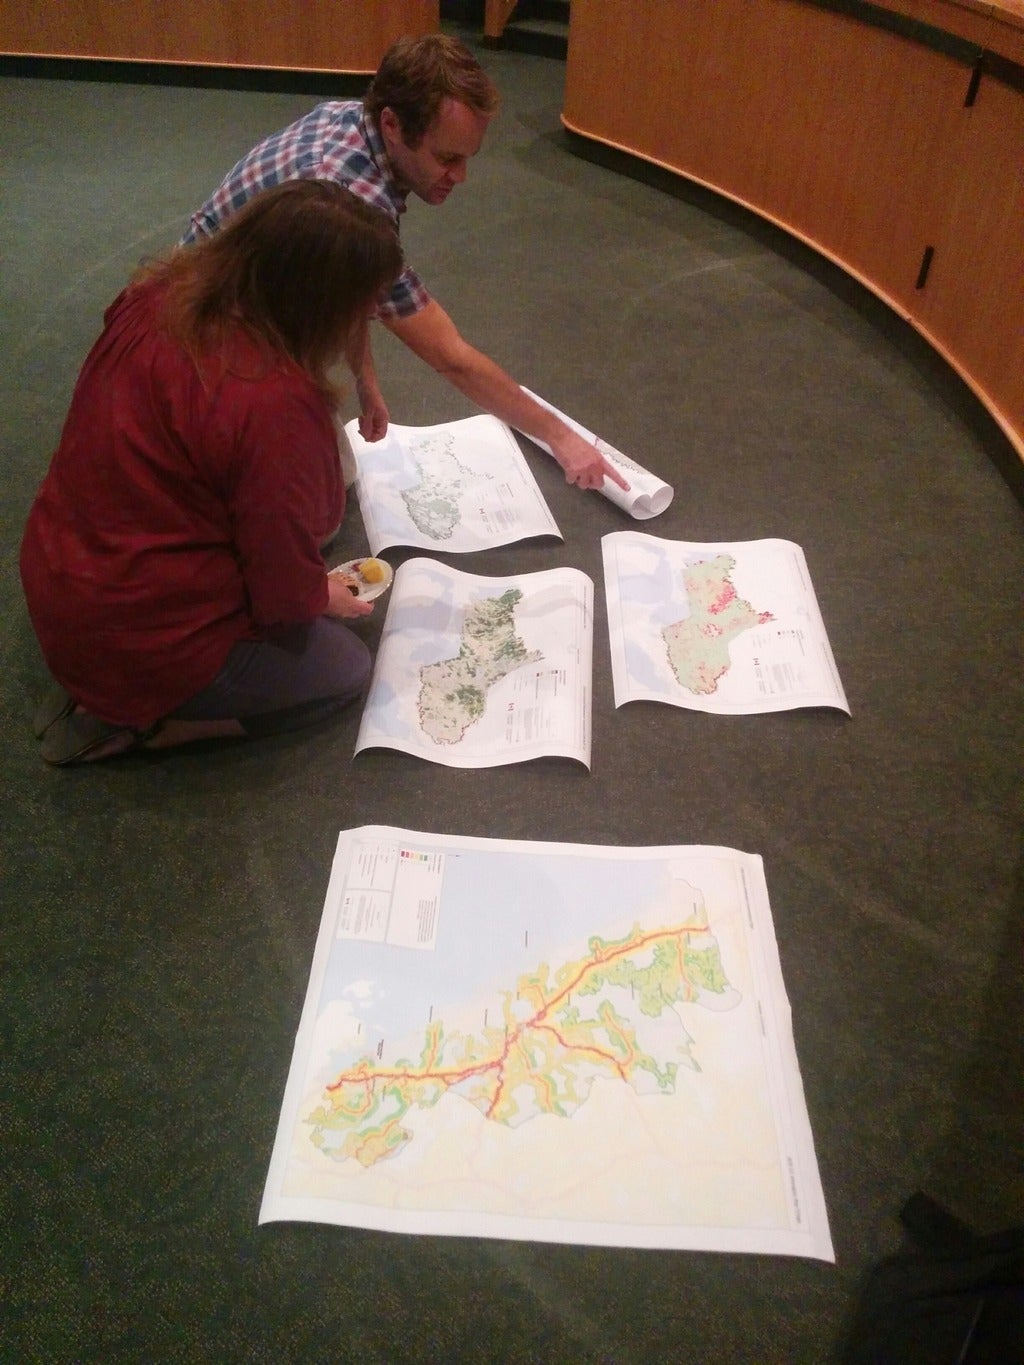 Looking at maps